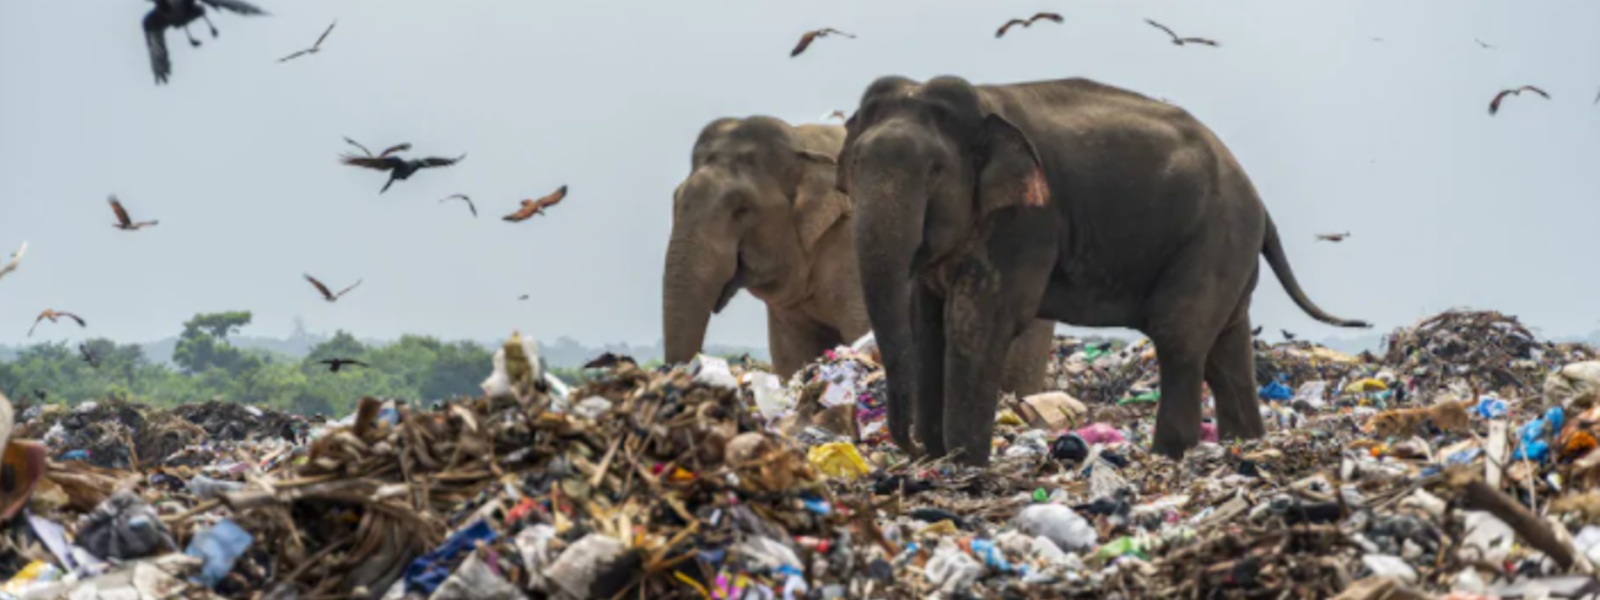 Measures underway to prevent elephants from consuming polythene